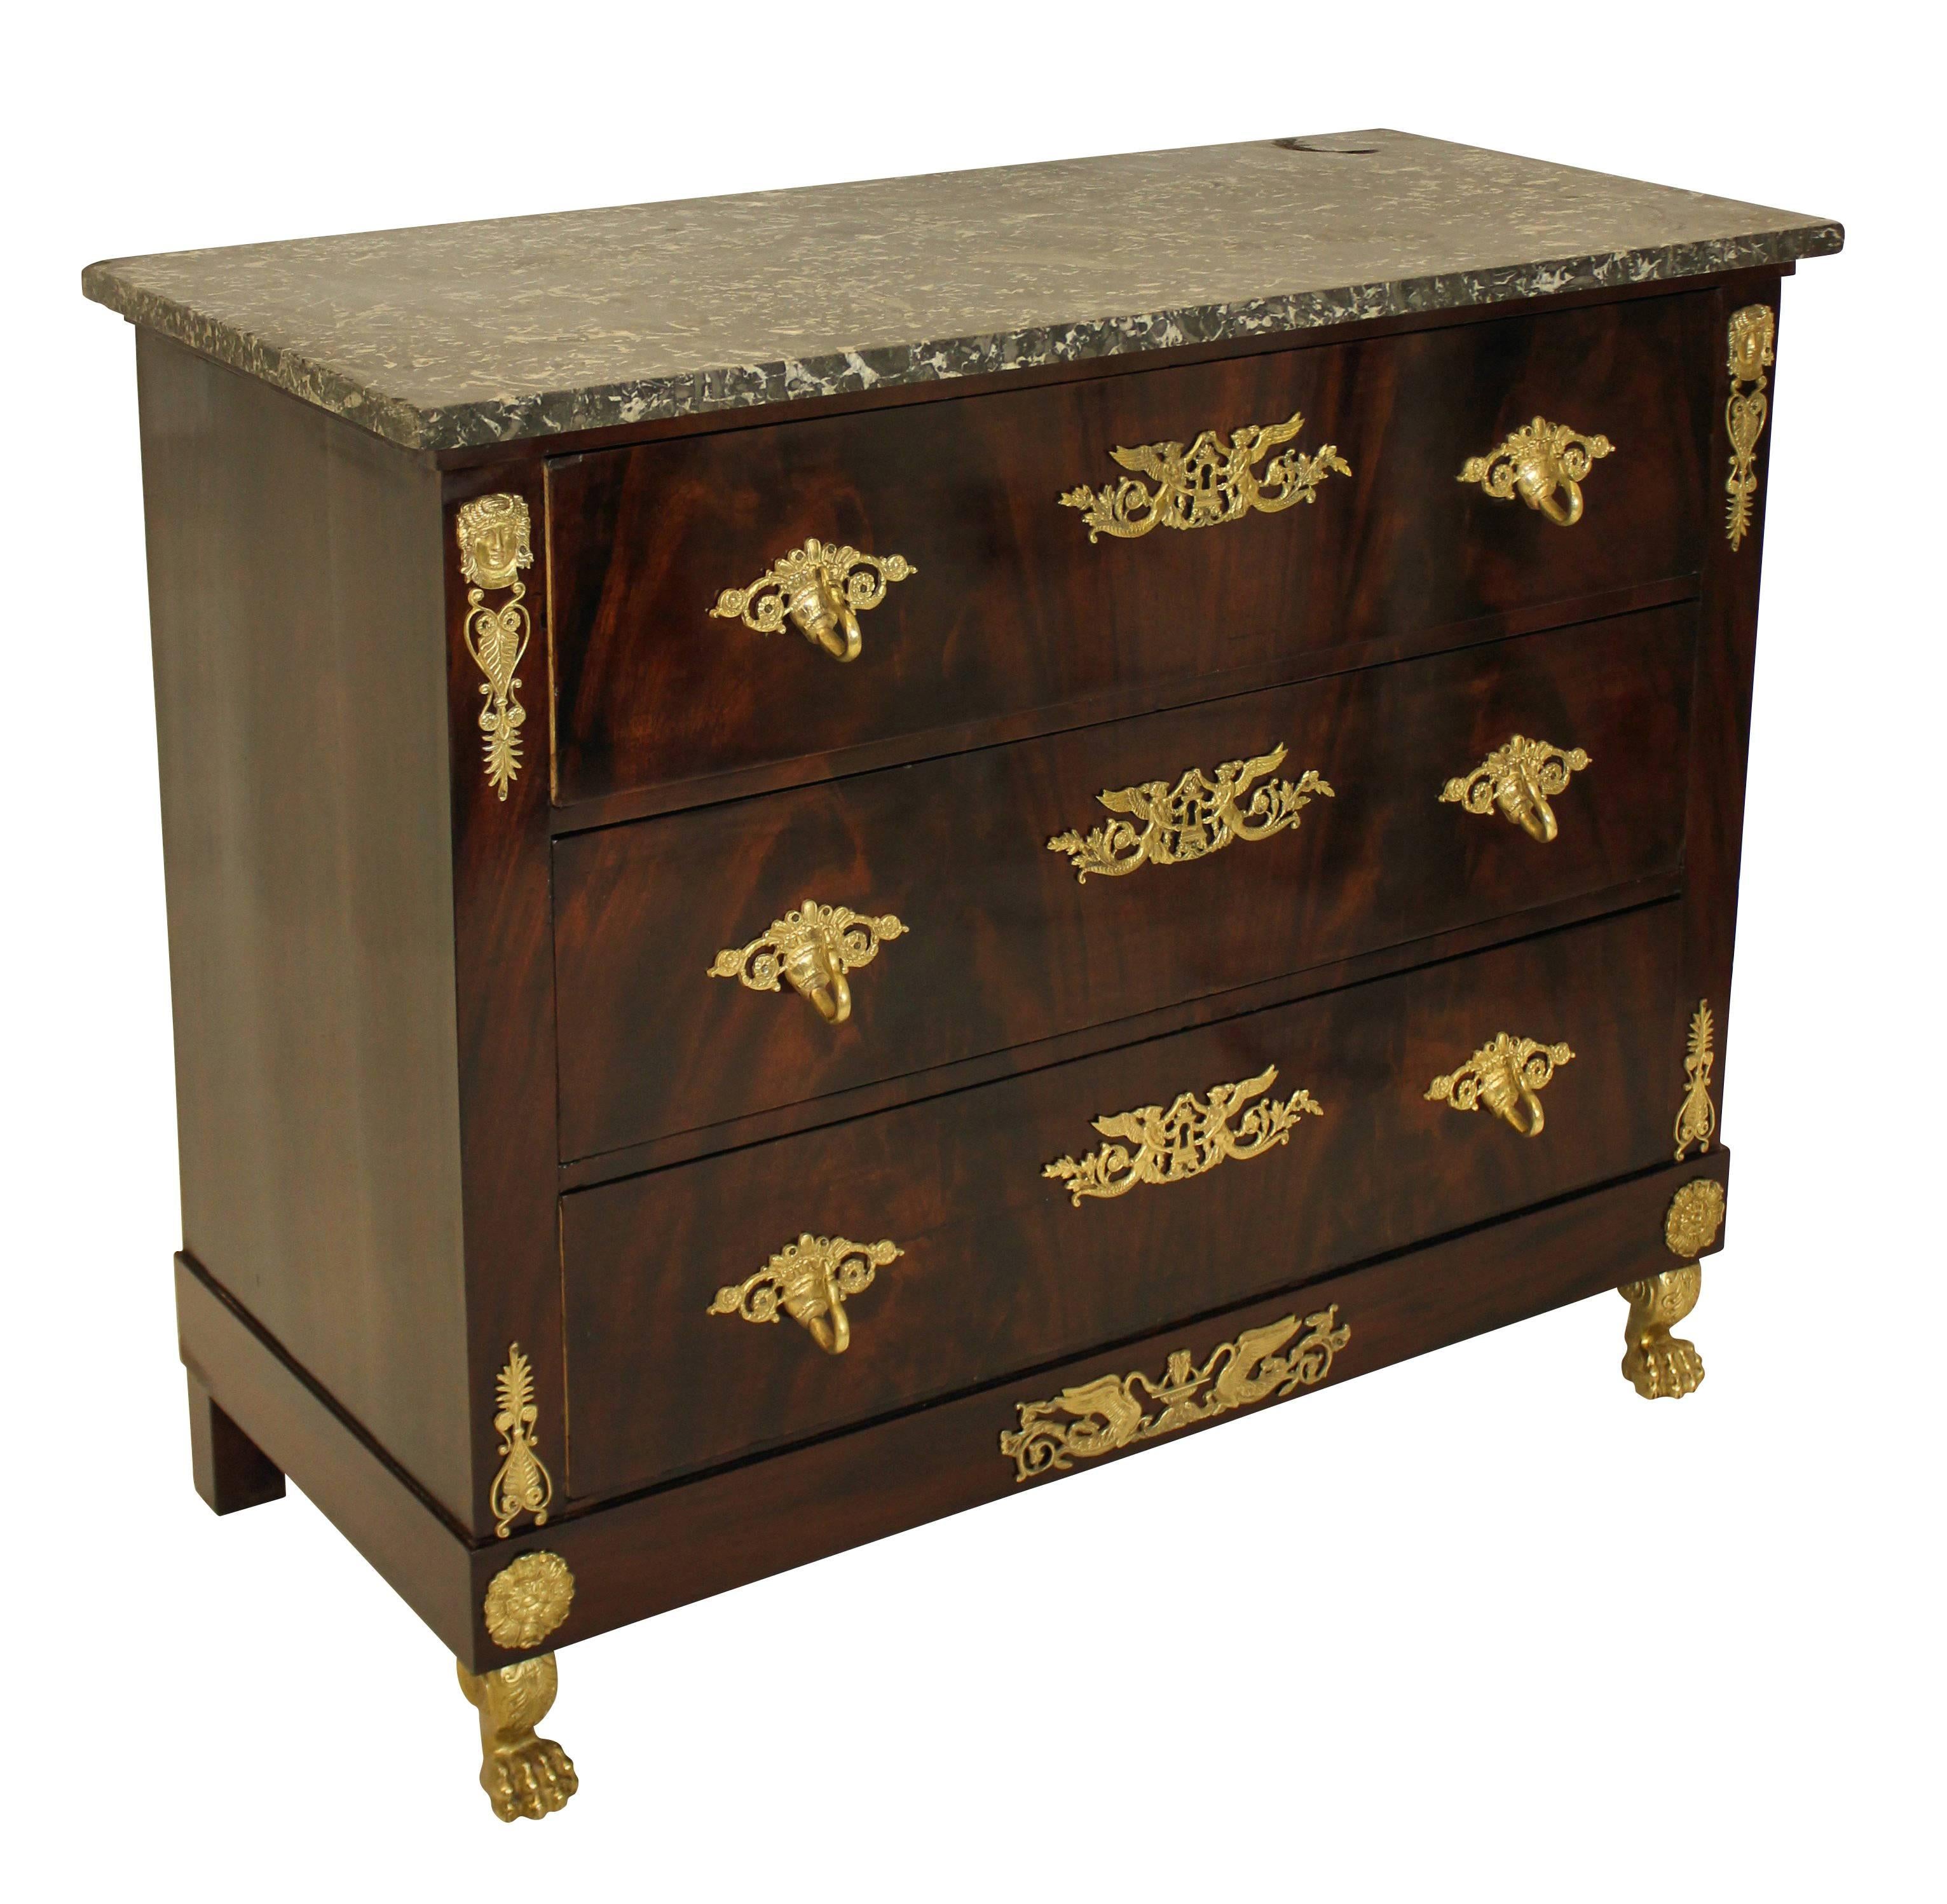 A French, first Empire commode of good quality. In flame mahogany, comprising four drawers, profusely decorated with gilt, bronze mounts with detailed gilt bronze lion paw feet and a Belgian fossil marble top.